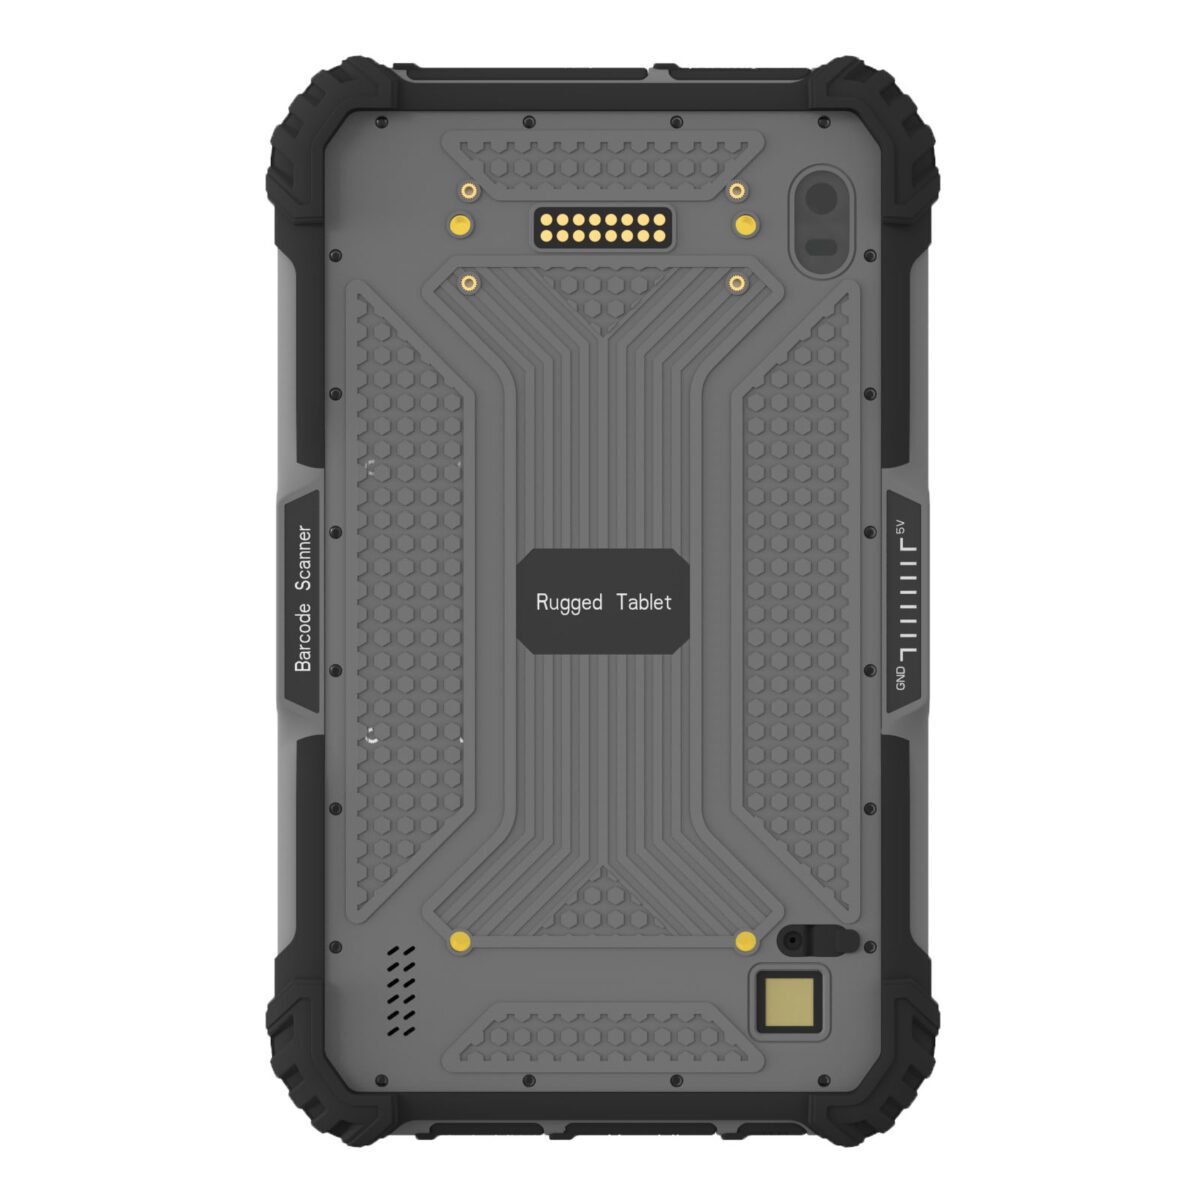 The back view of an 8" Android 11 Rugged Handheld Tablet with barcode scanner.